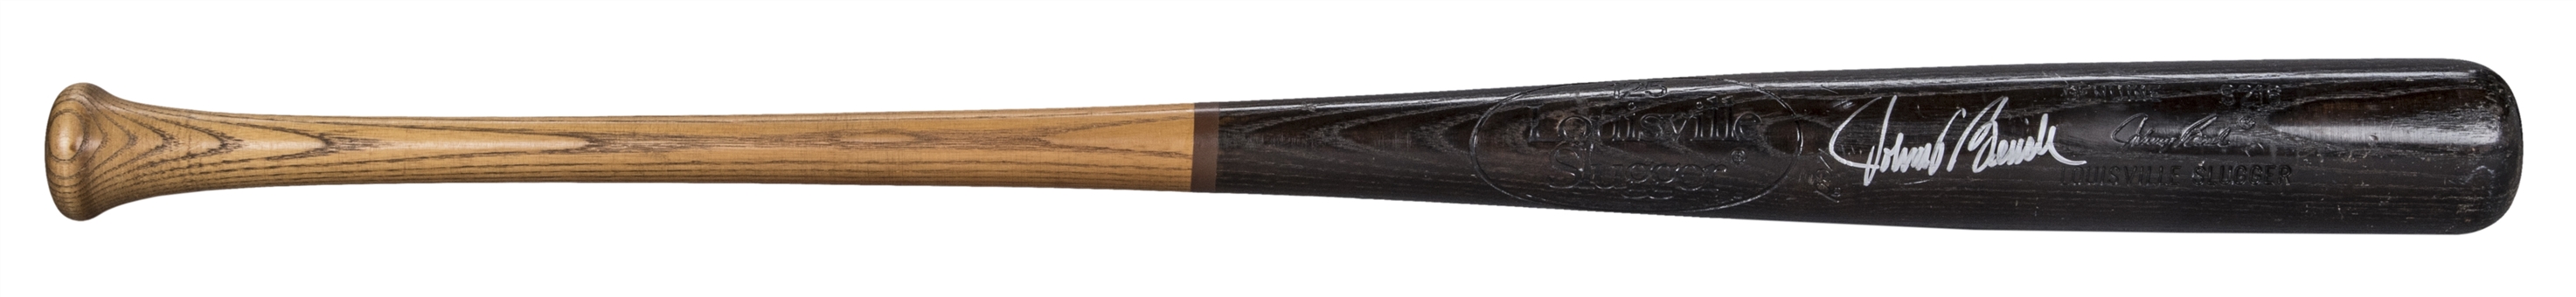 1982 Johnny Bench Game Used and Signed Hillerich & Bradsby S216 Model Bat (PSA/DNA)